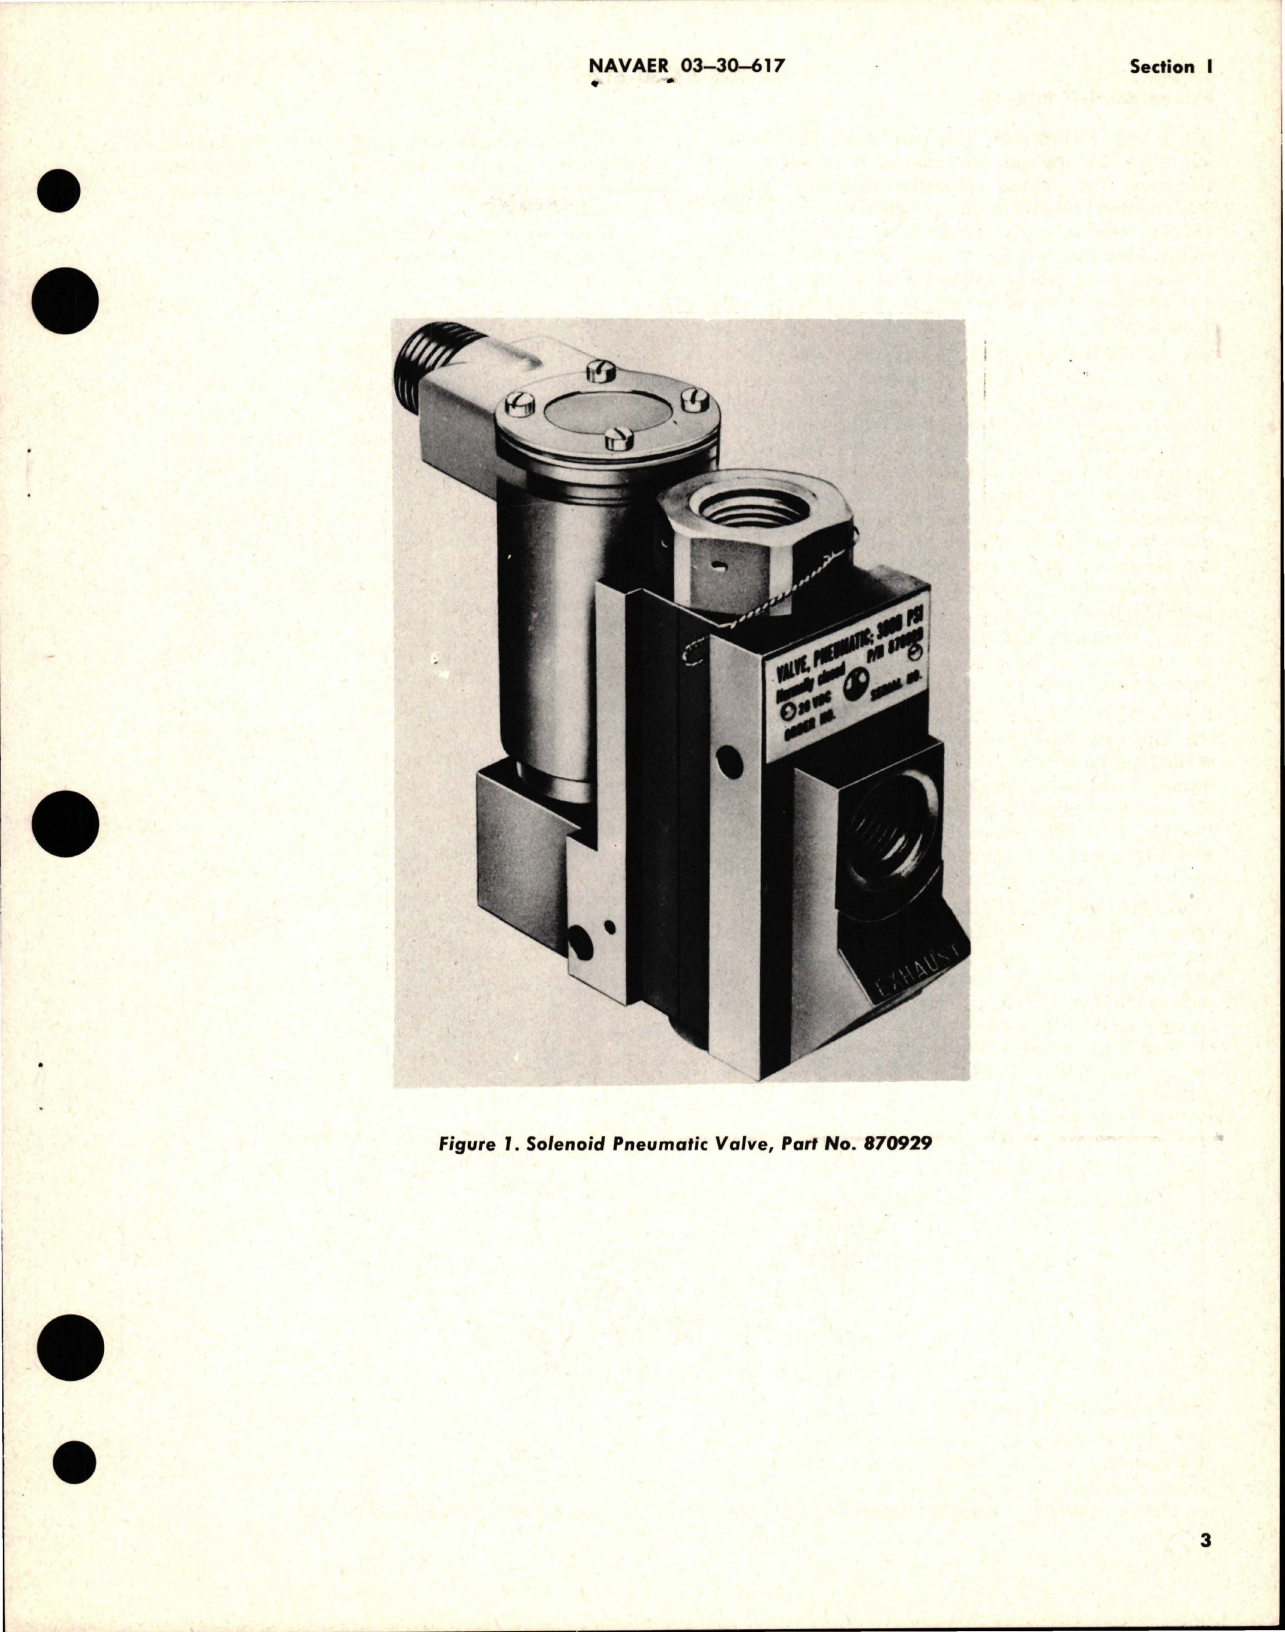 Sample page 5 from AirCorps Library document: Illustrated Parts Breakdown for Solenoid Pneumatic Valves